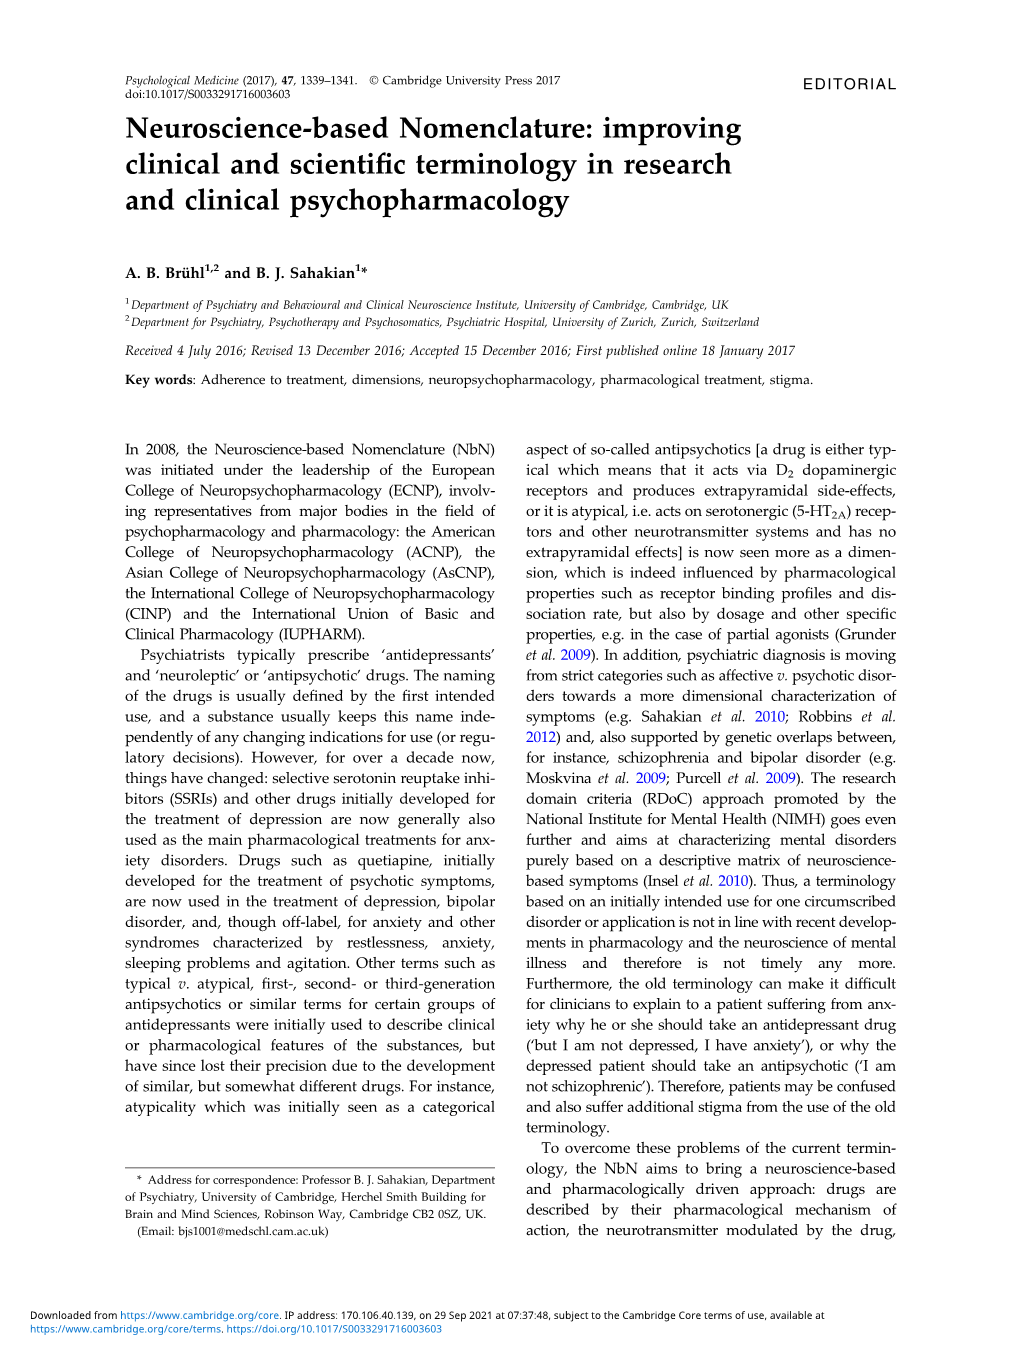 Neuroscience-Based Nomenclature: Improving Clinical and Scientific